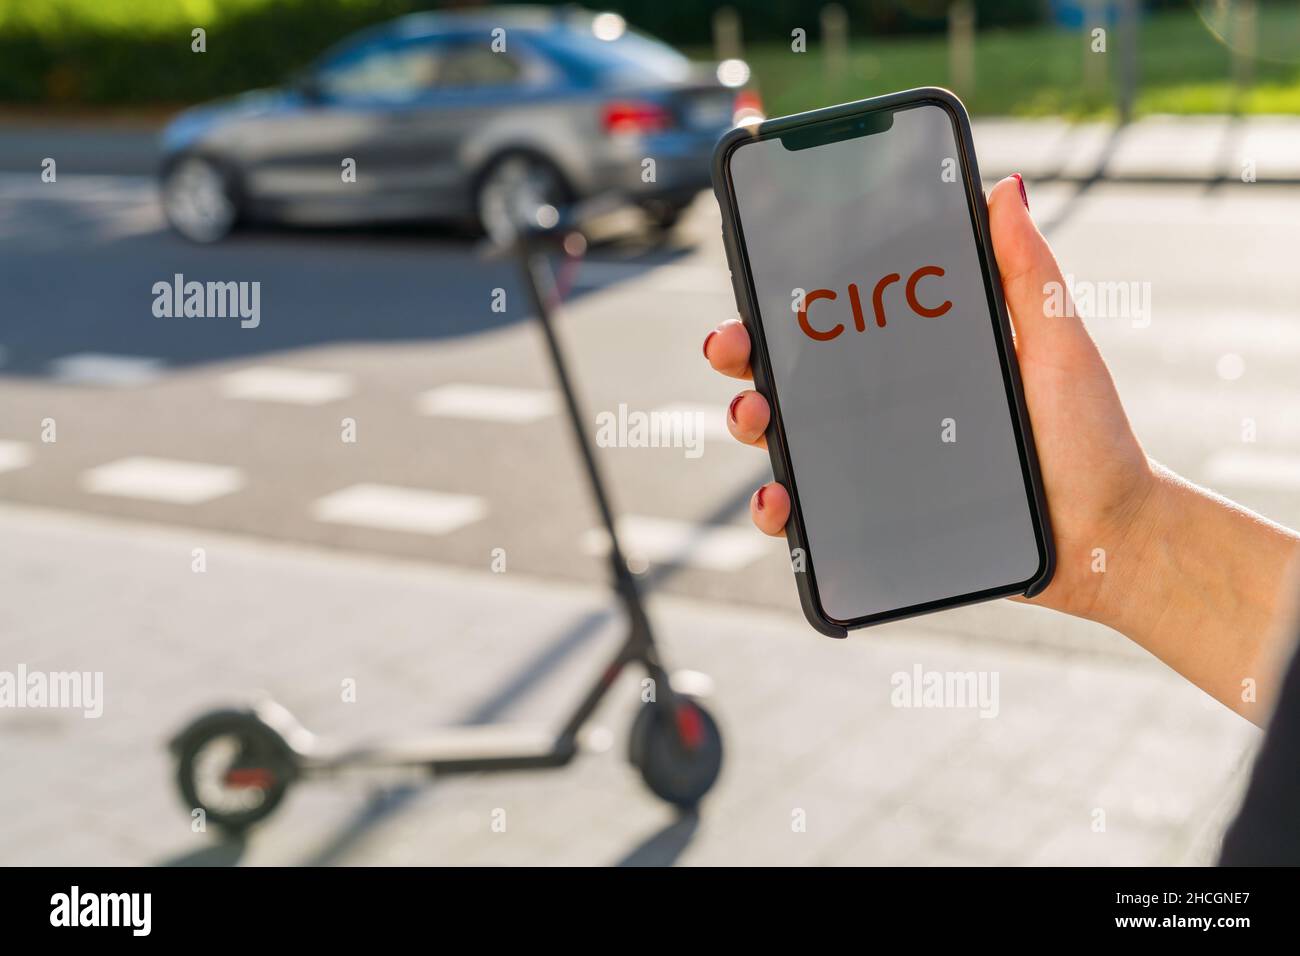 Woman hand holding iphone Xs with logo of CIRC app displayed on a smartphone to rent a e-Scooter. Circ is a rental electric scooter company. Quick Stock Photo